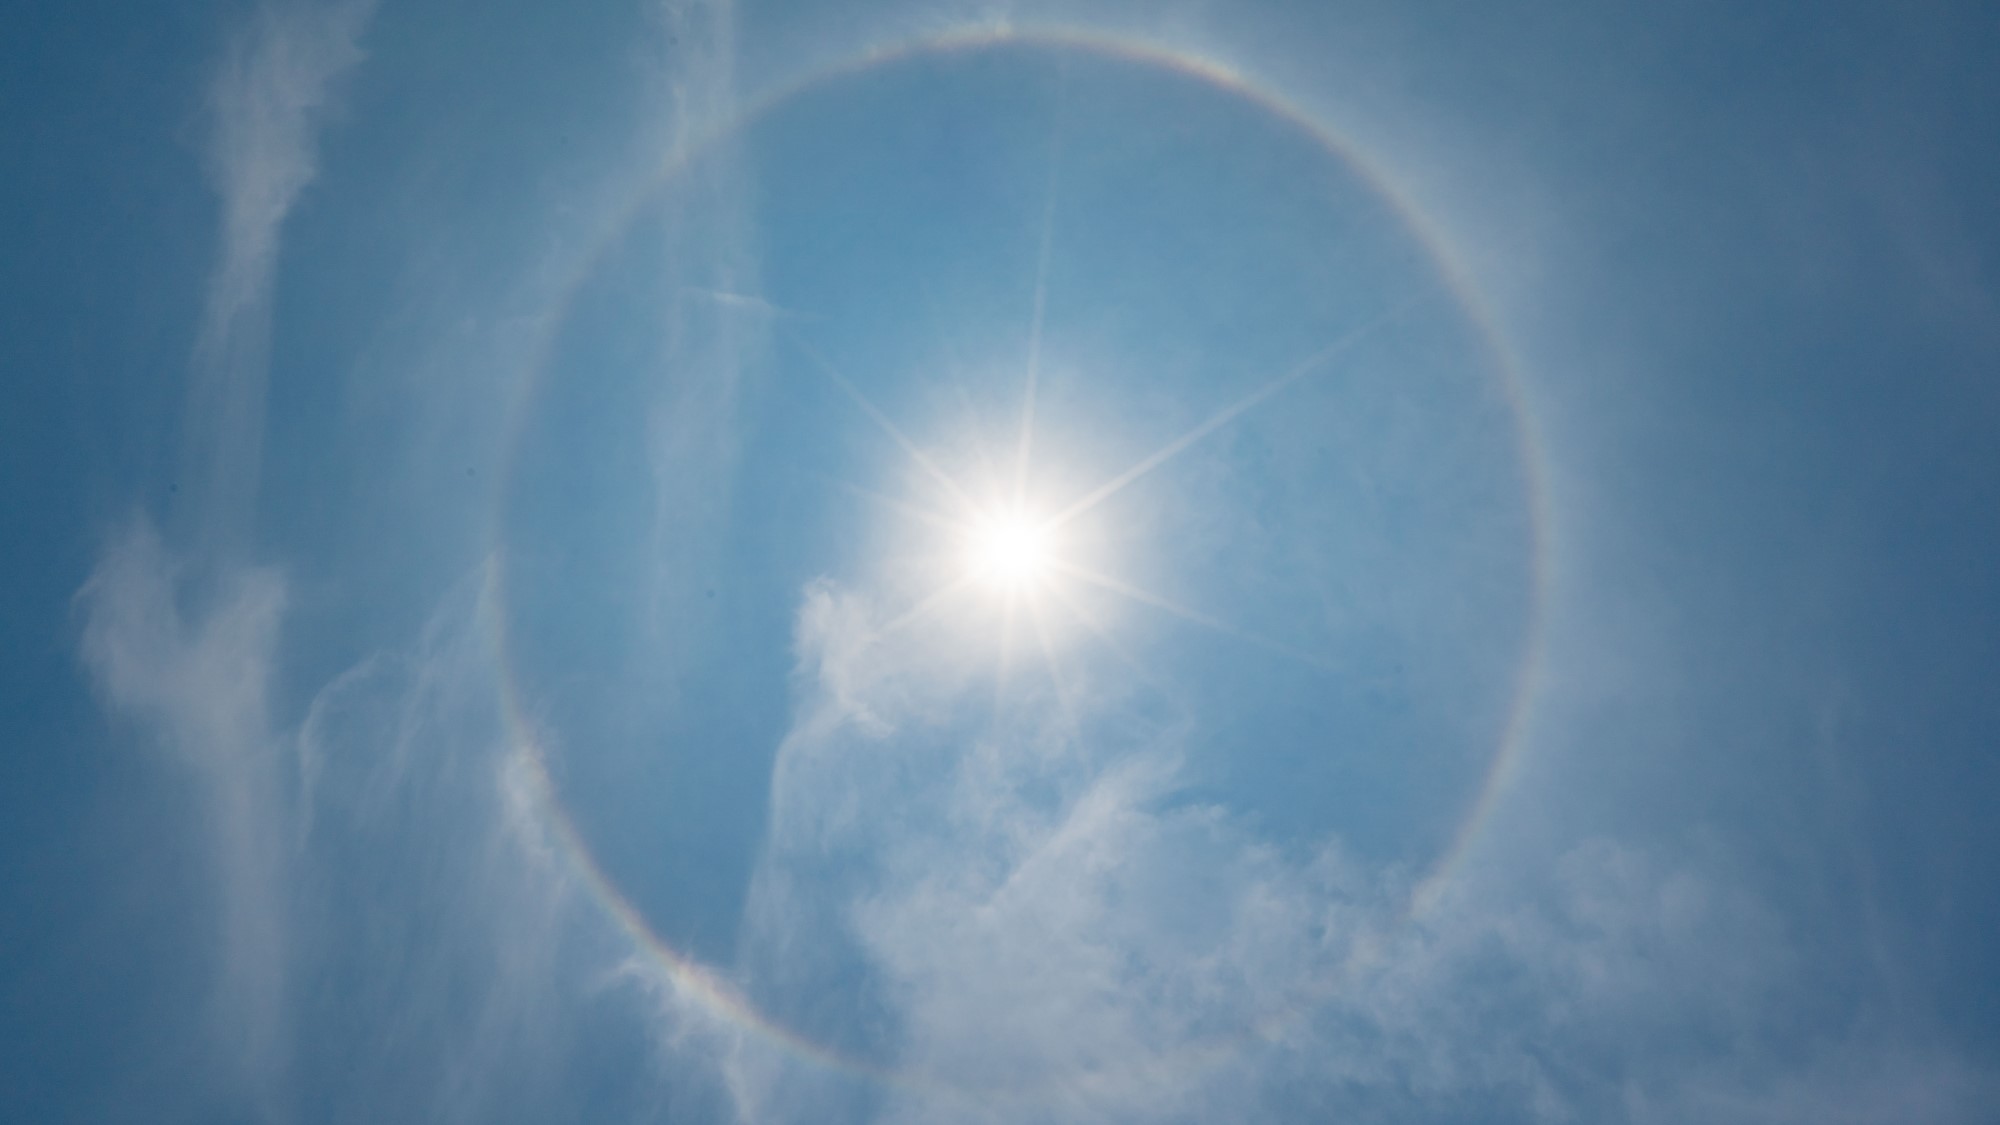 the sun surrounded by a bright ring against a blue sky with wispy white clouds